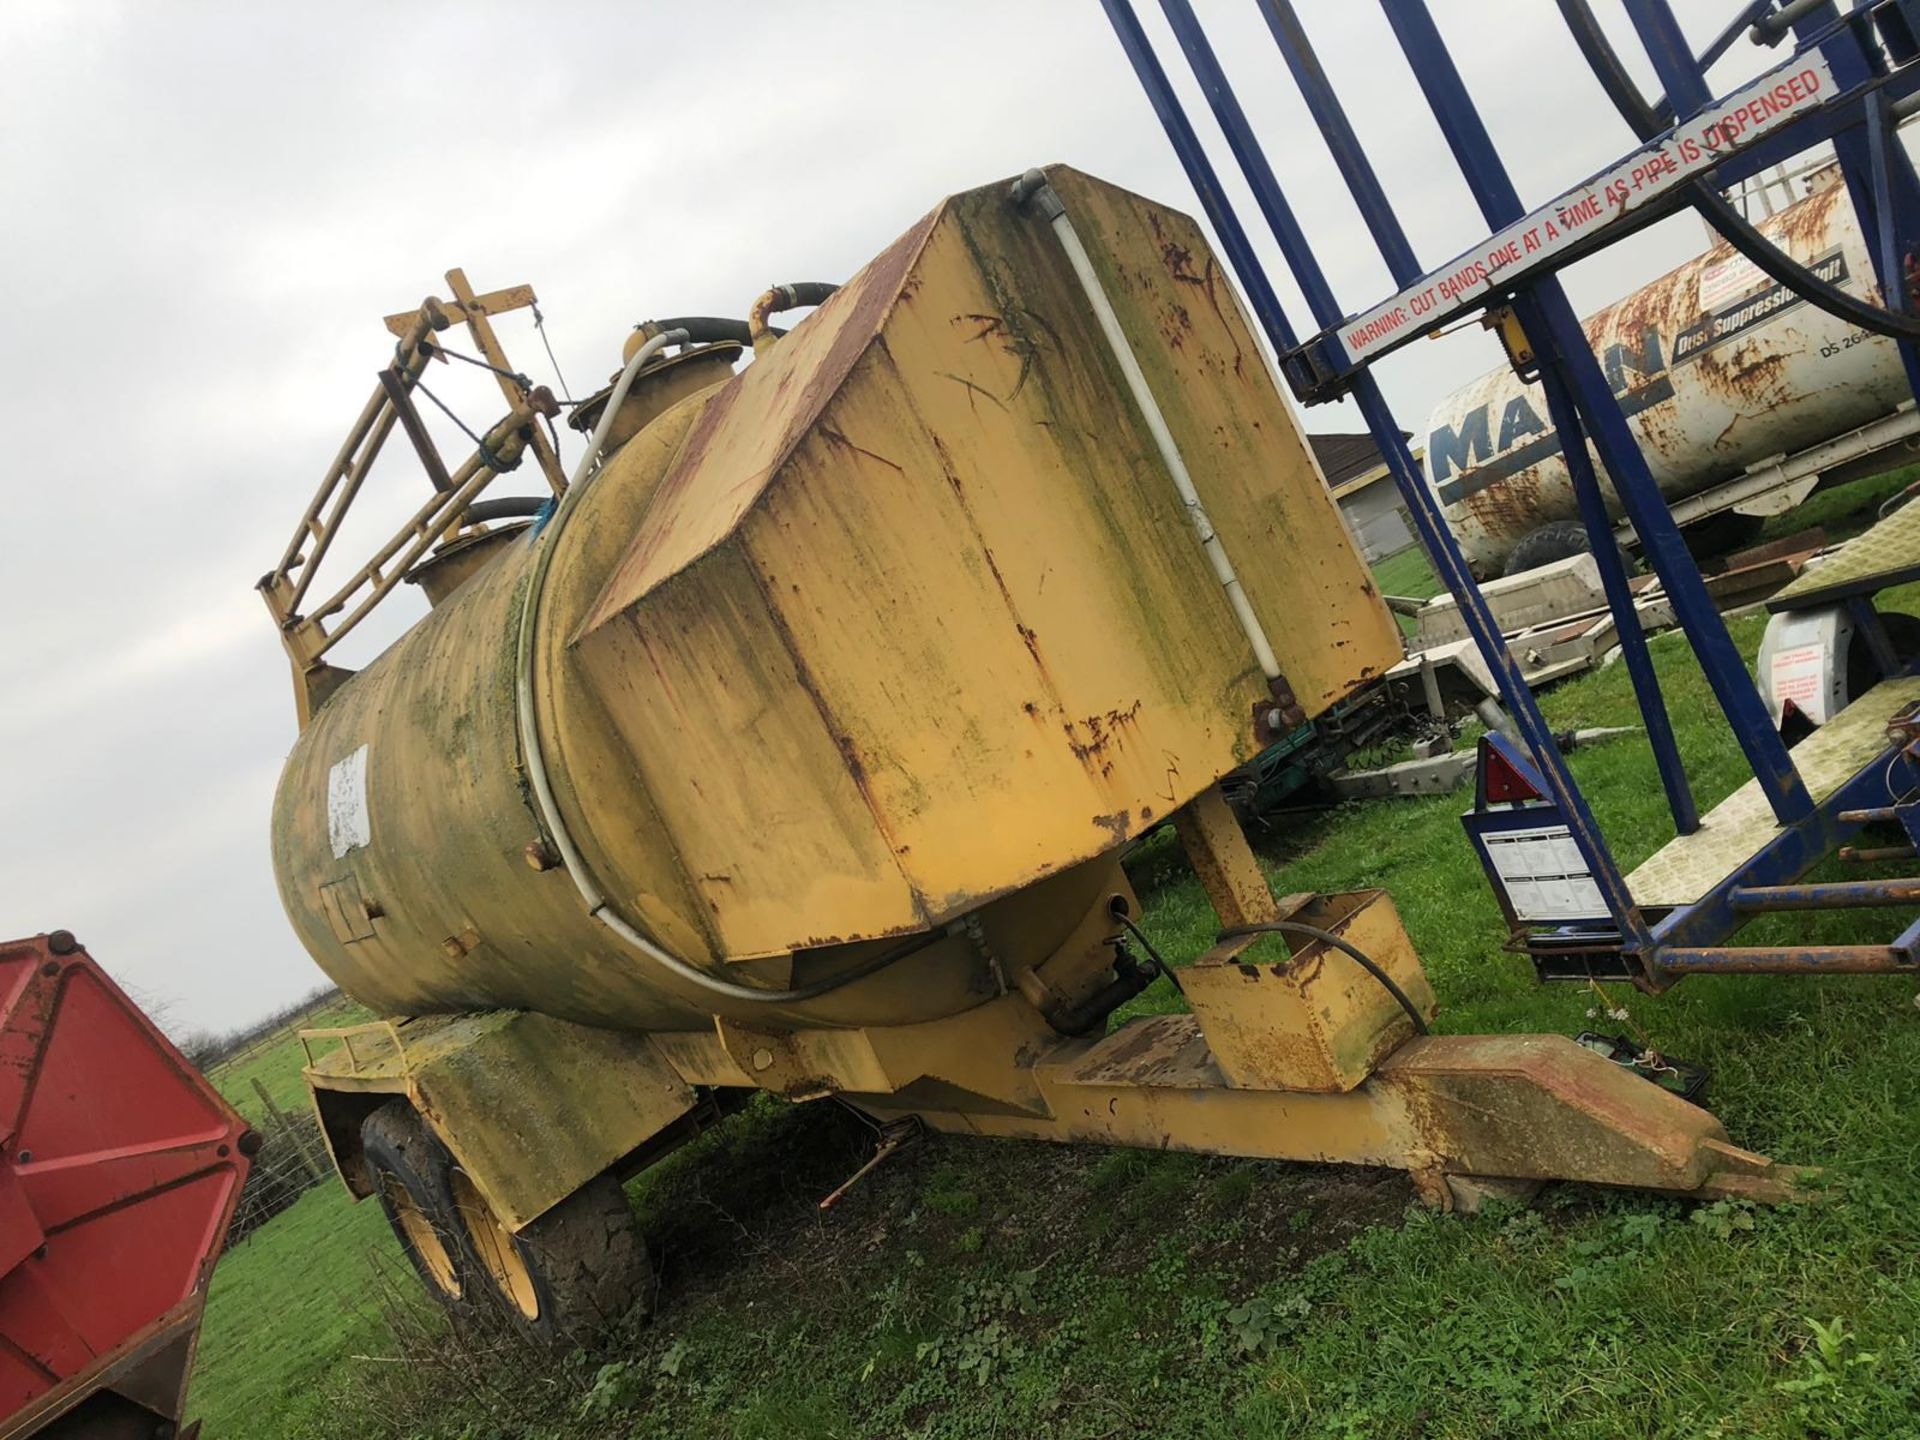 1989 TWIN AXLE TOW ABLE YELLOW OIL TANK, SERIAL NUMBER: VE 355 *PLUS VAT* - Image 7 of 10